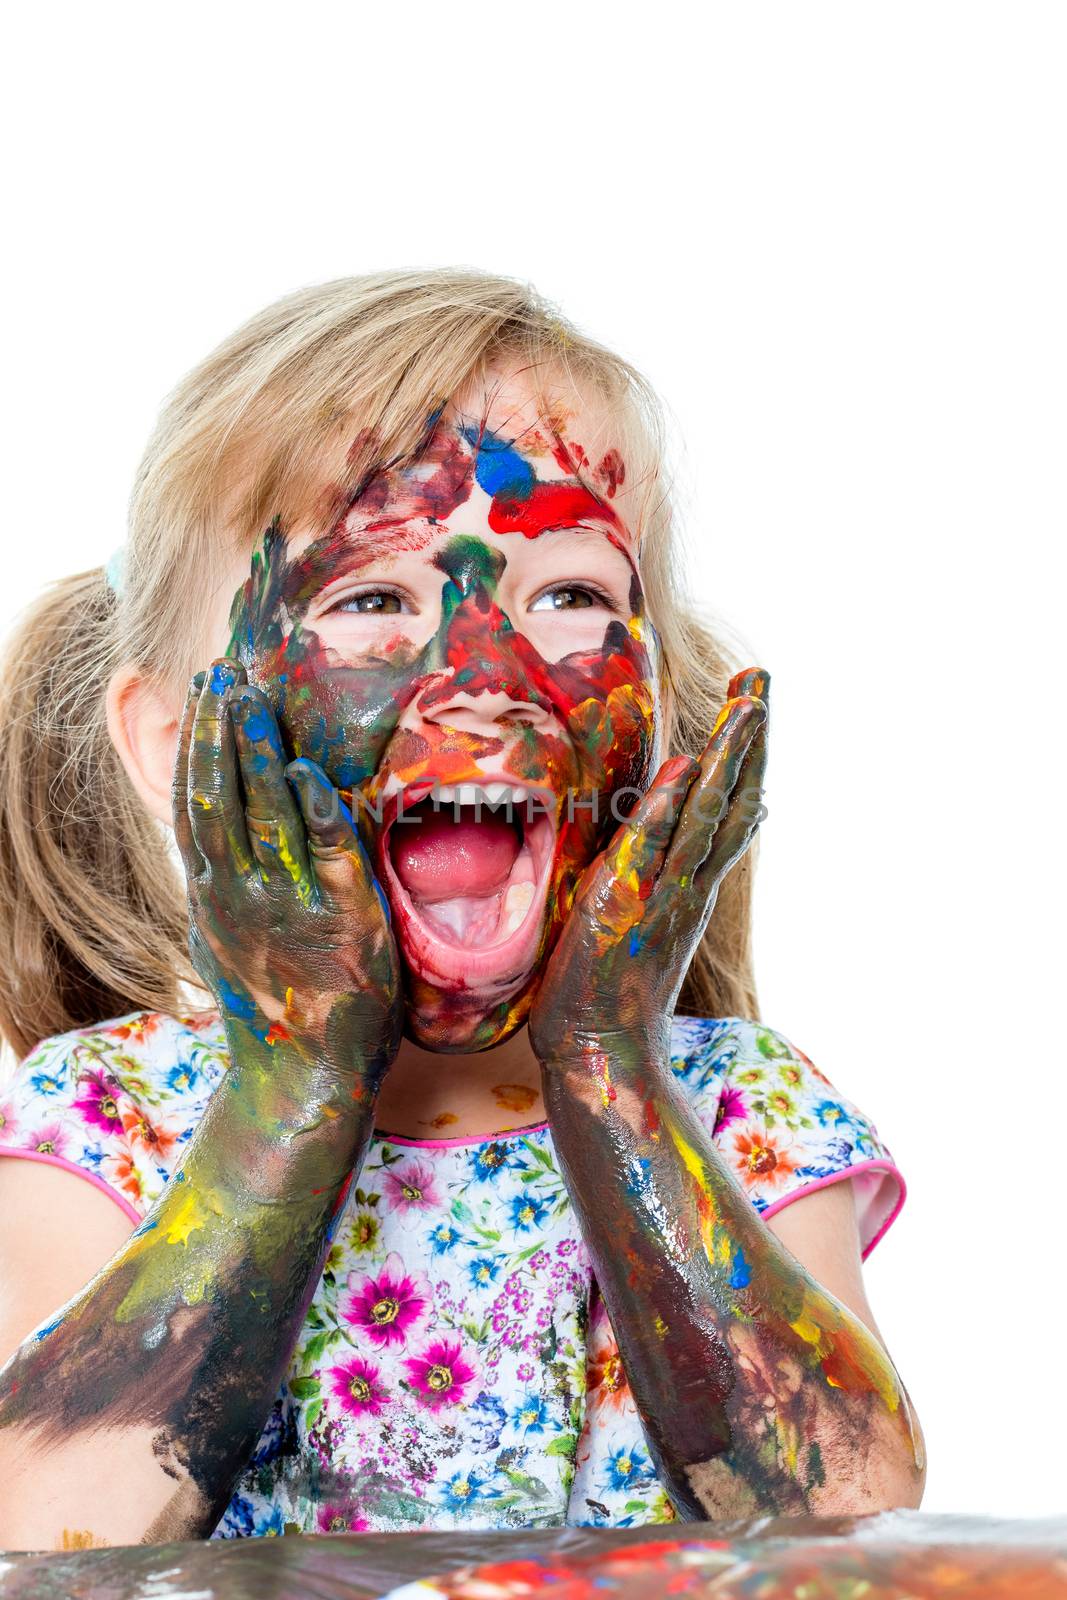 Little girl painting face with hands. by karelnoppe